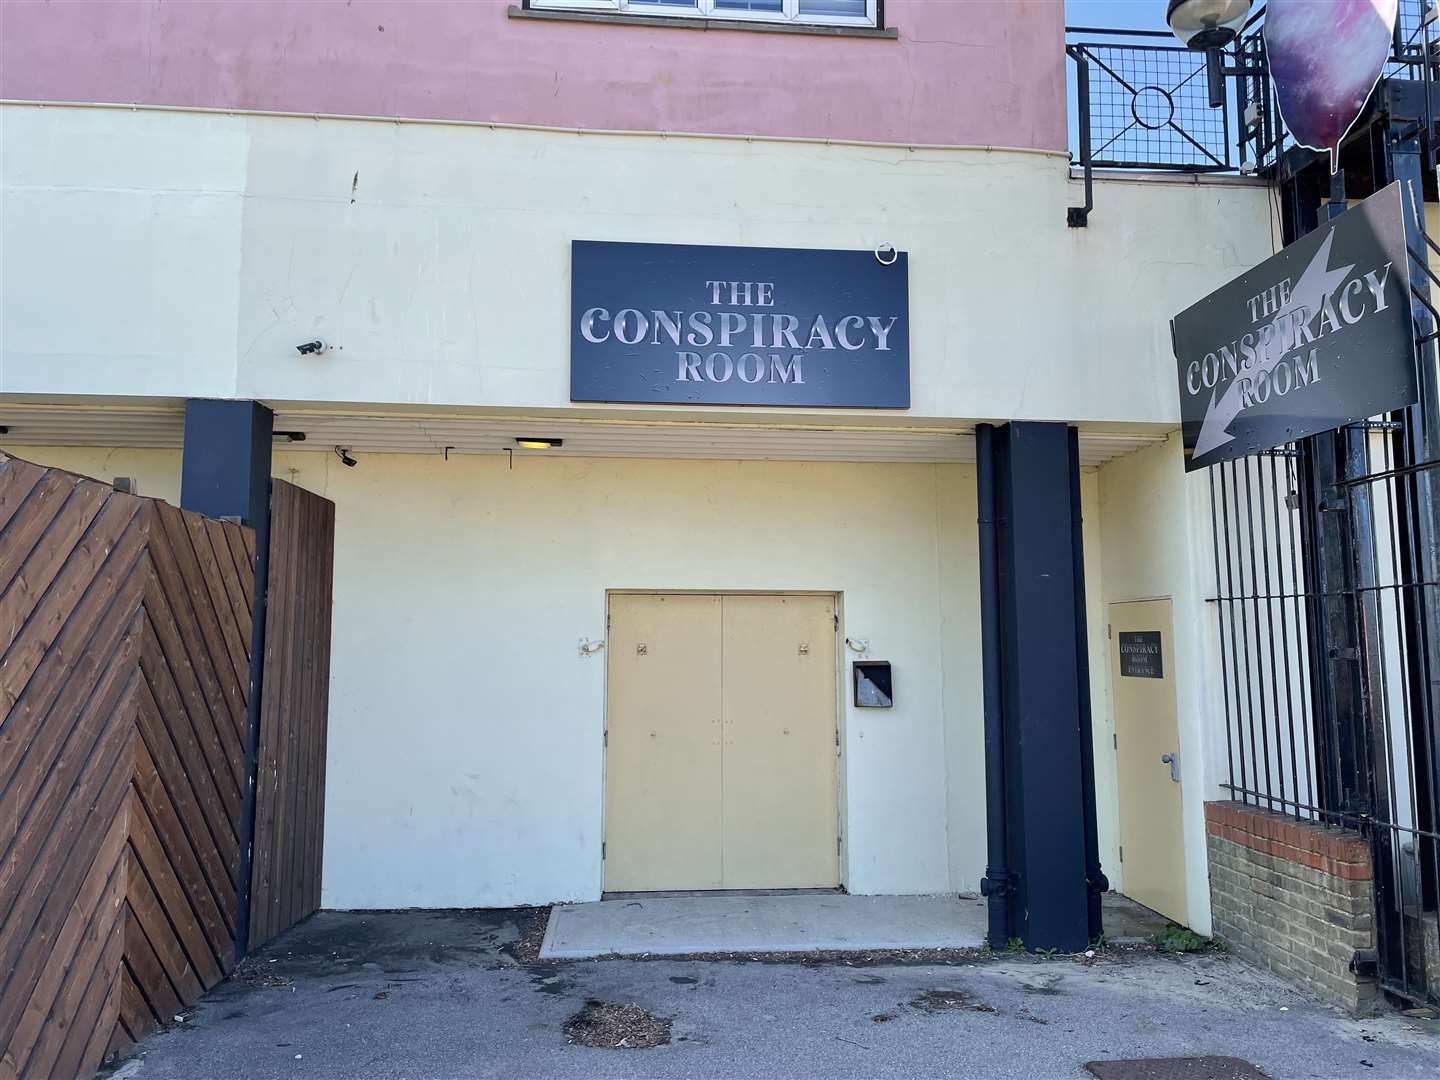 The Conspiracy Room, a new live music venue, is taking over part of Tantra nightclub in Sheerness